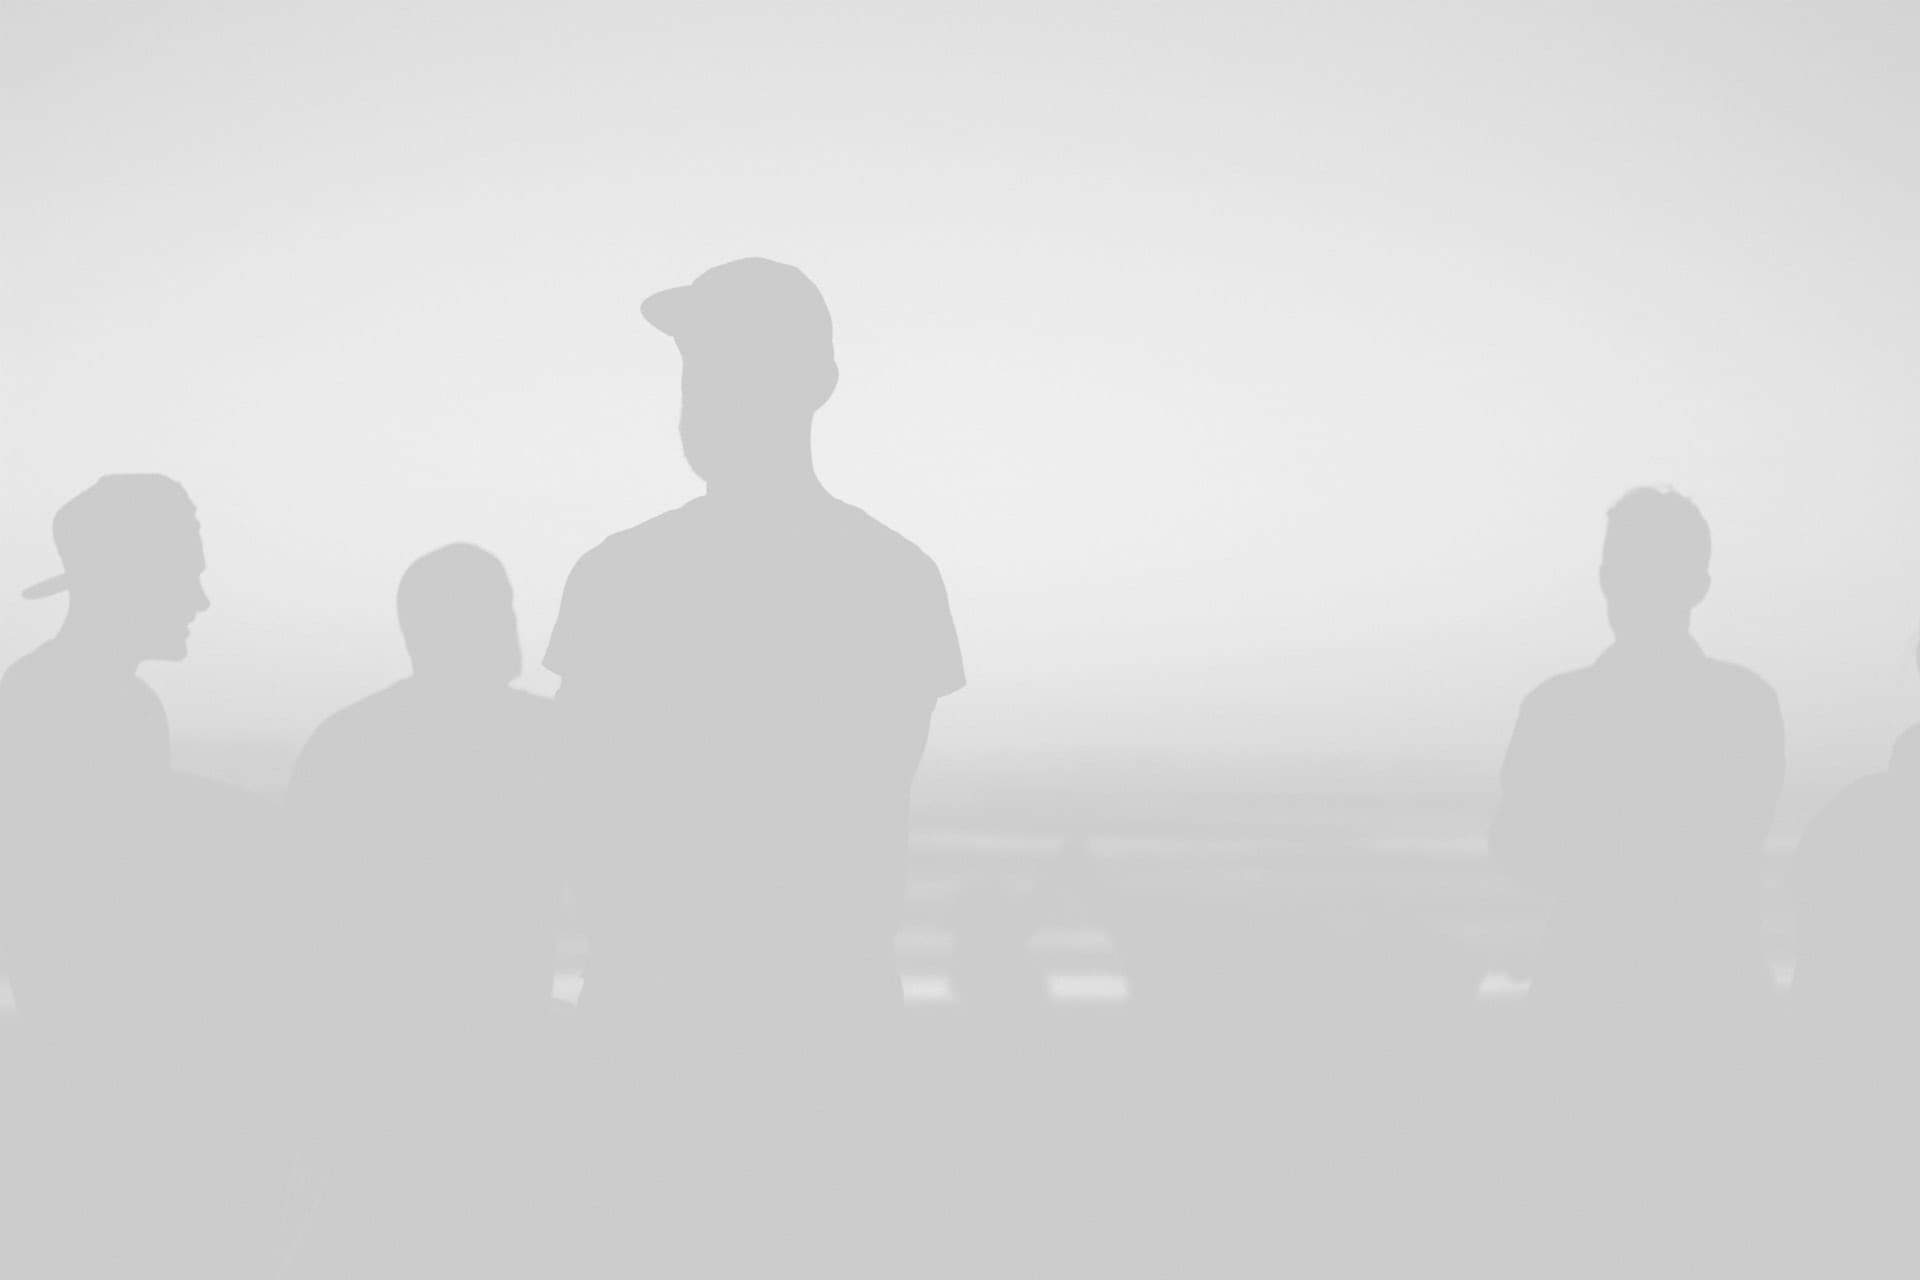 Silhouettes of several people, one prominently in a cap, against a softly illuminated white background.